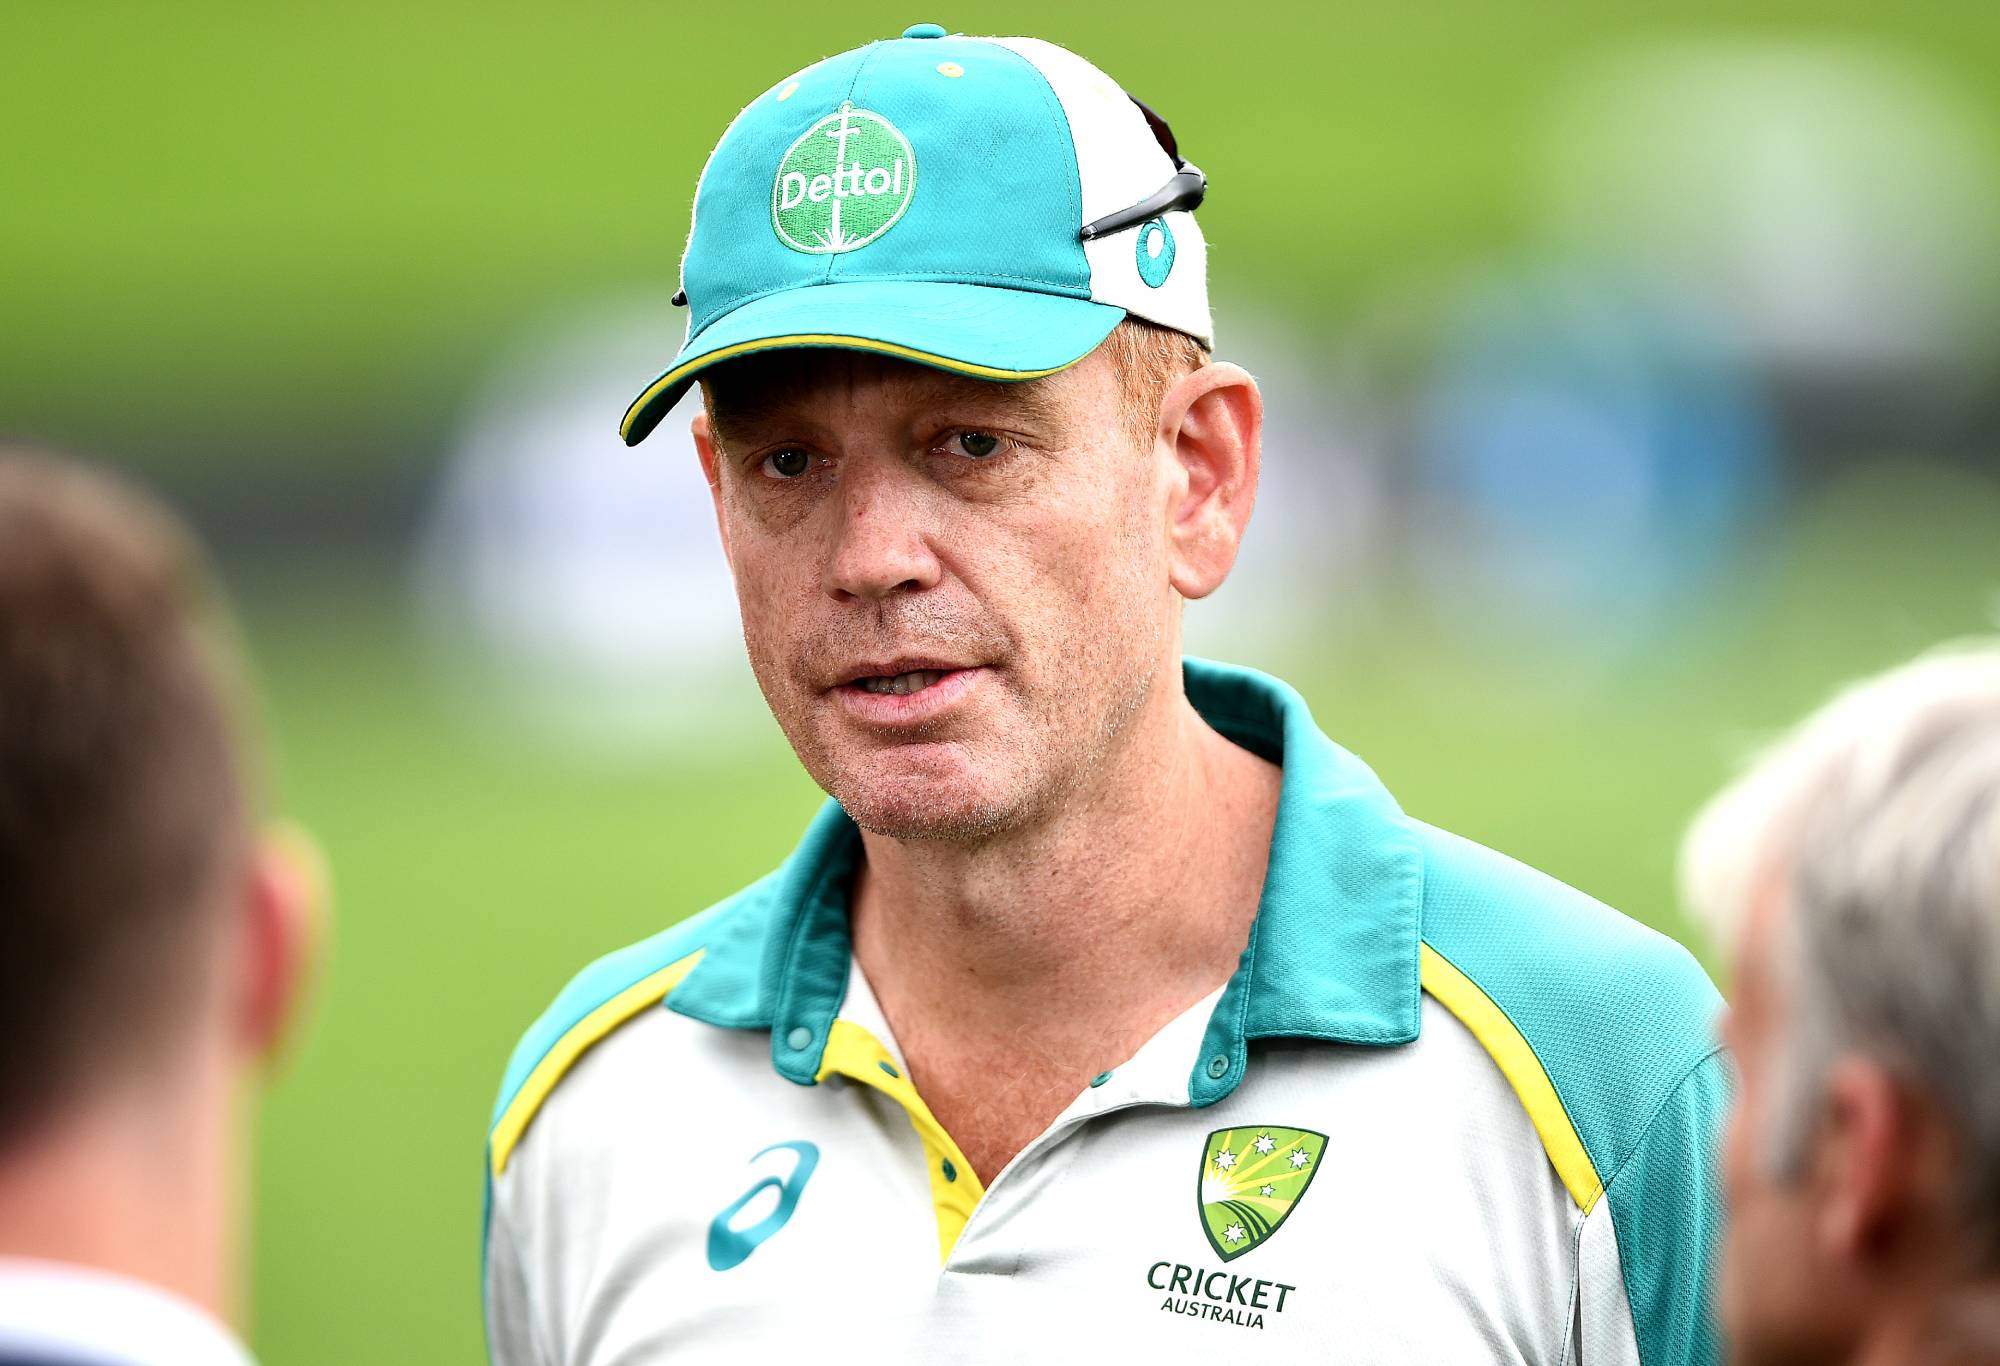 Australia Head Coach Andrew McDonald speaks to the media during an Australia International T20 training session at the University of Otago Oval on February 24, 2021 in Dunedin, New Zealand.  (Photo by Joe Allison/Getty Images)